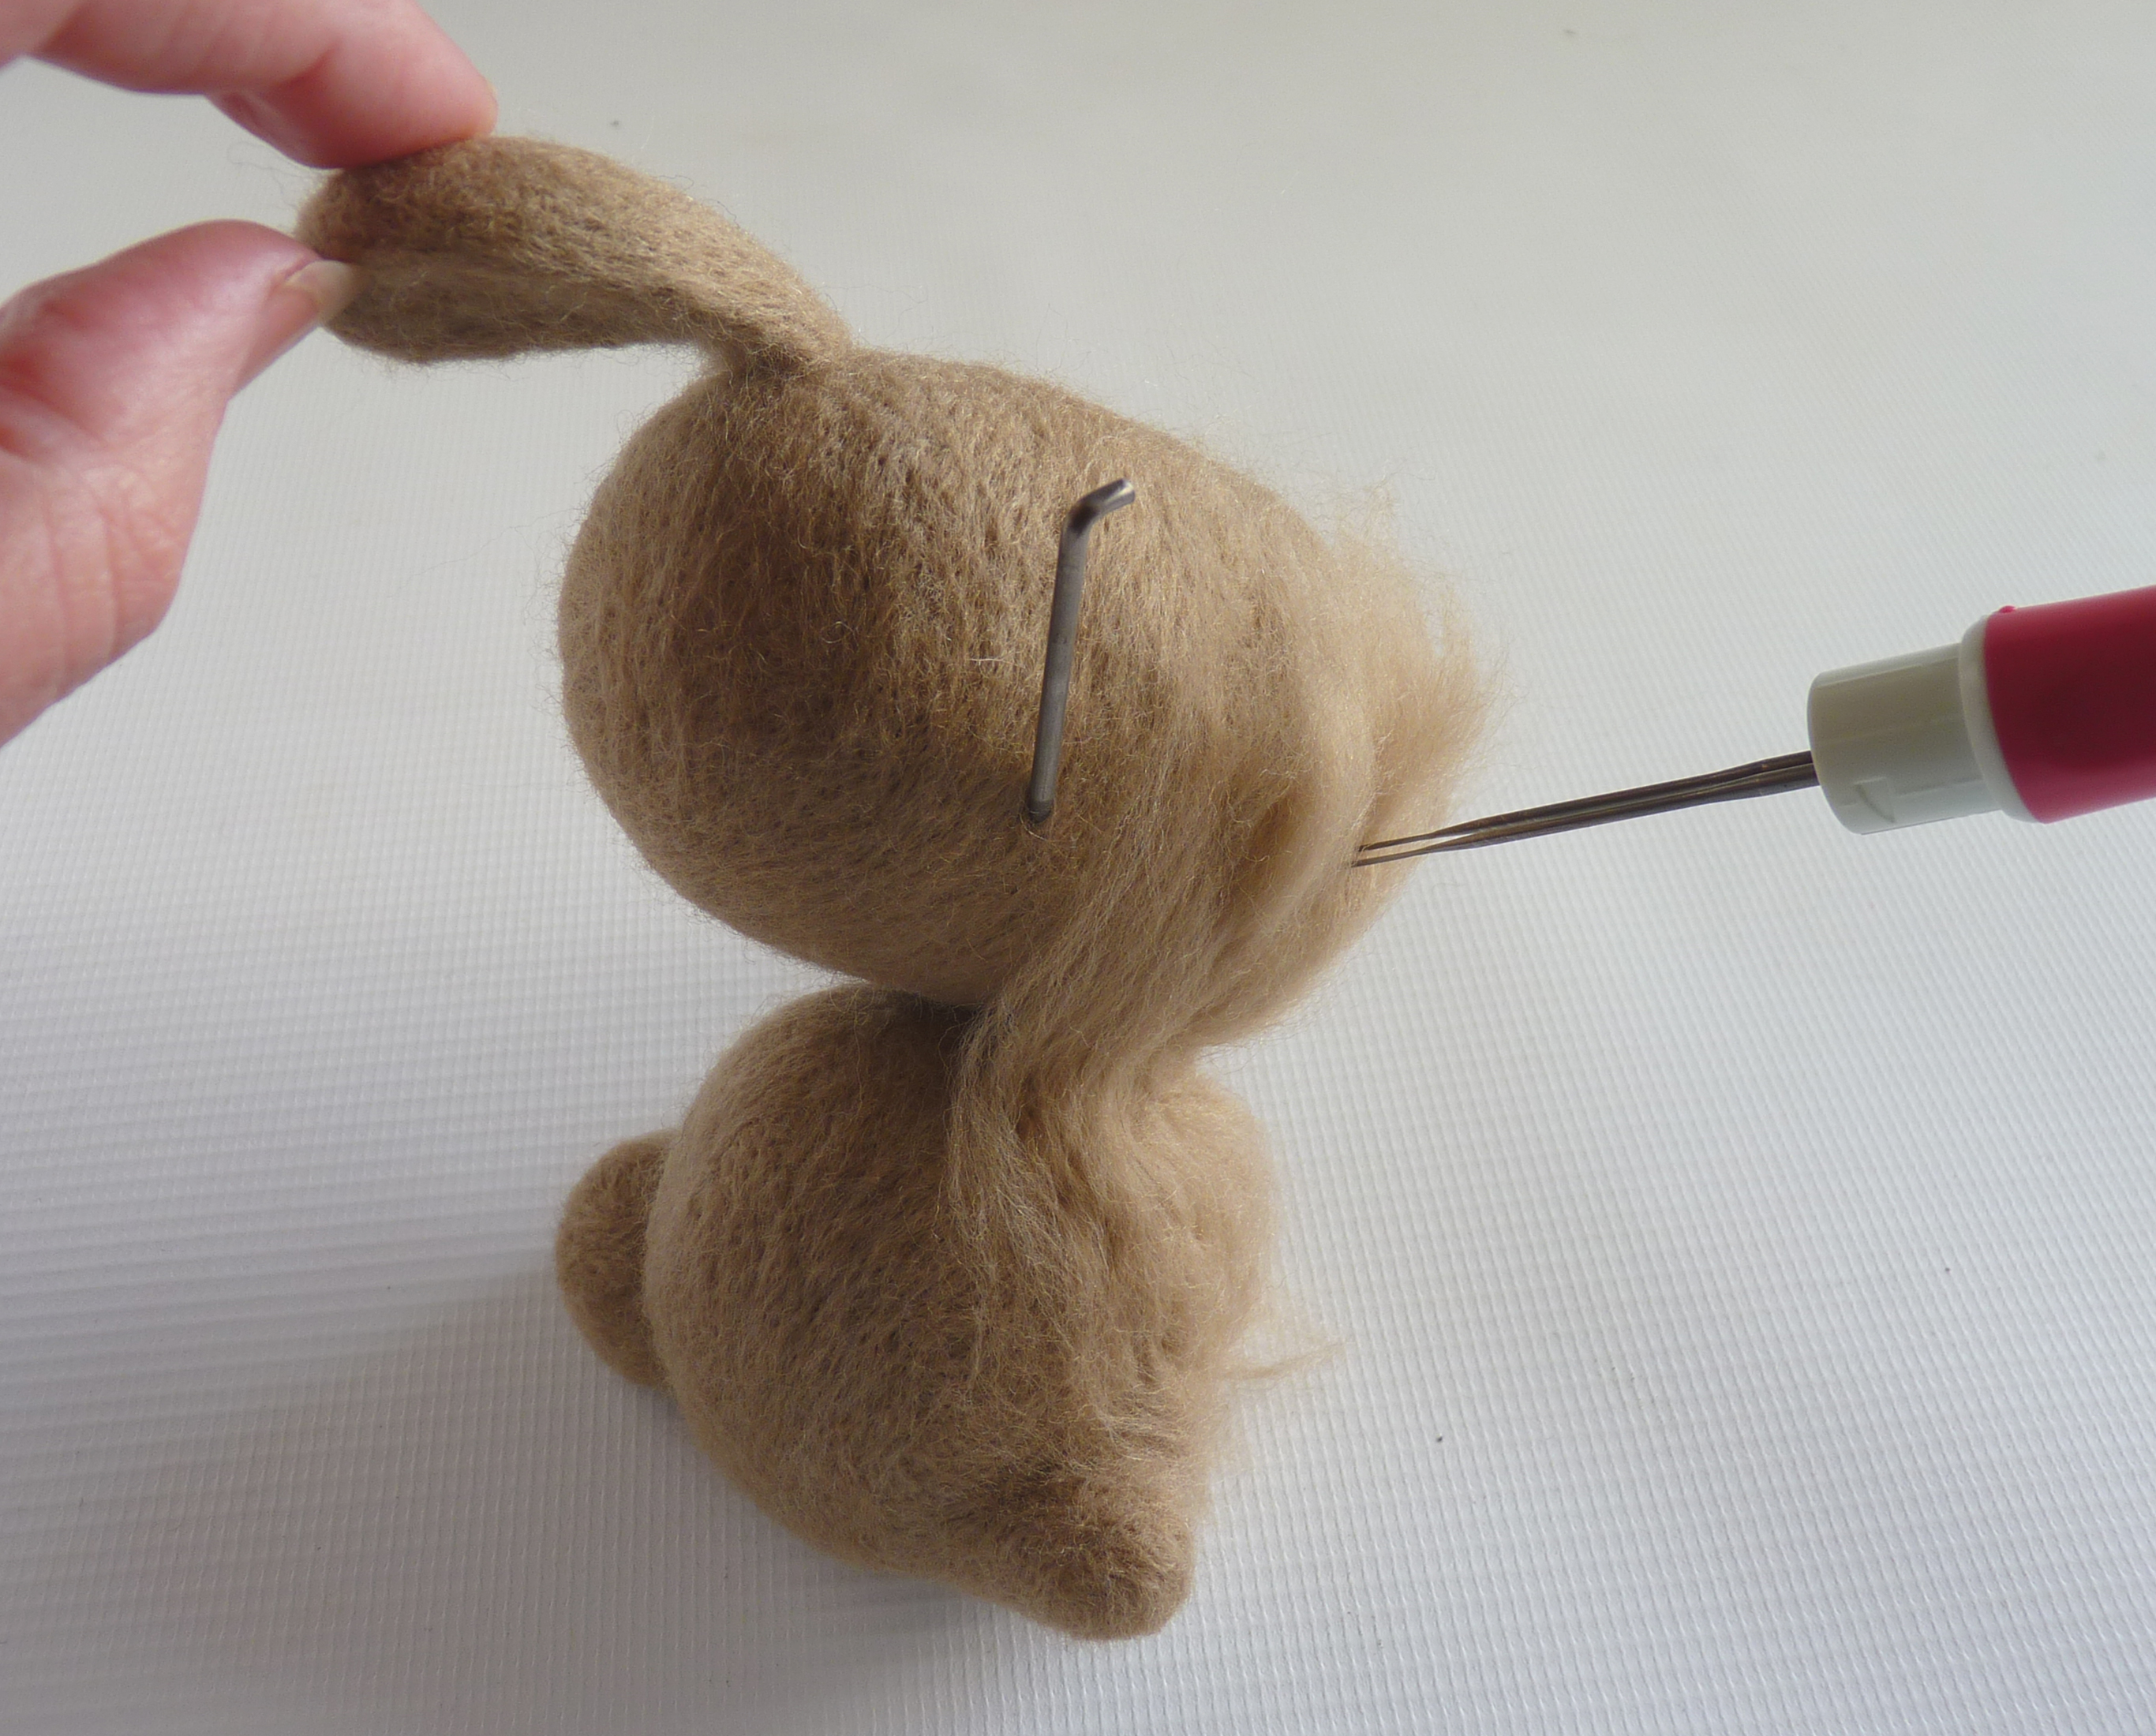 How to make needle felted animals - step 13